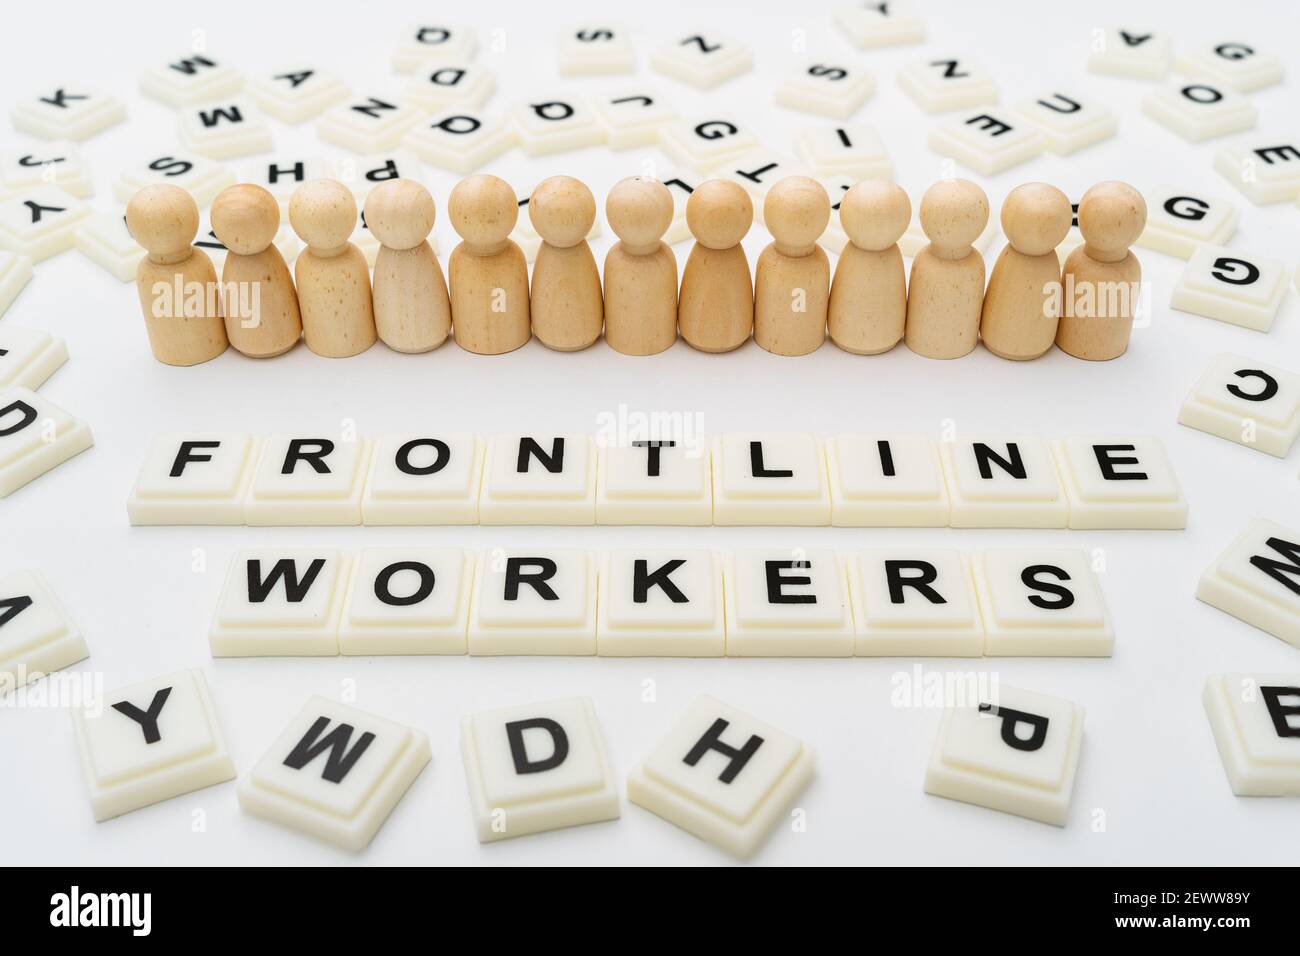 Frontline Workers Words With Line of Wooden Peg Doll Figurines on White Background Stock Photo